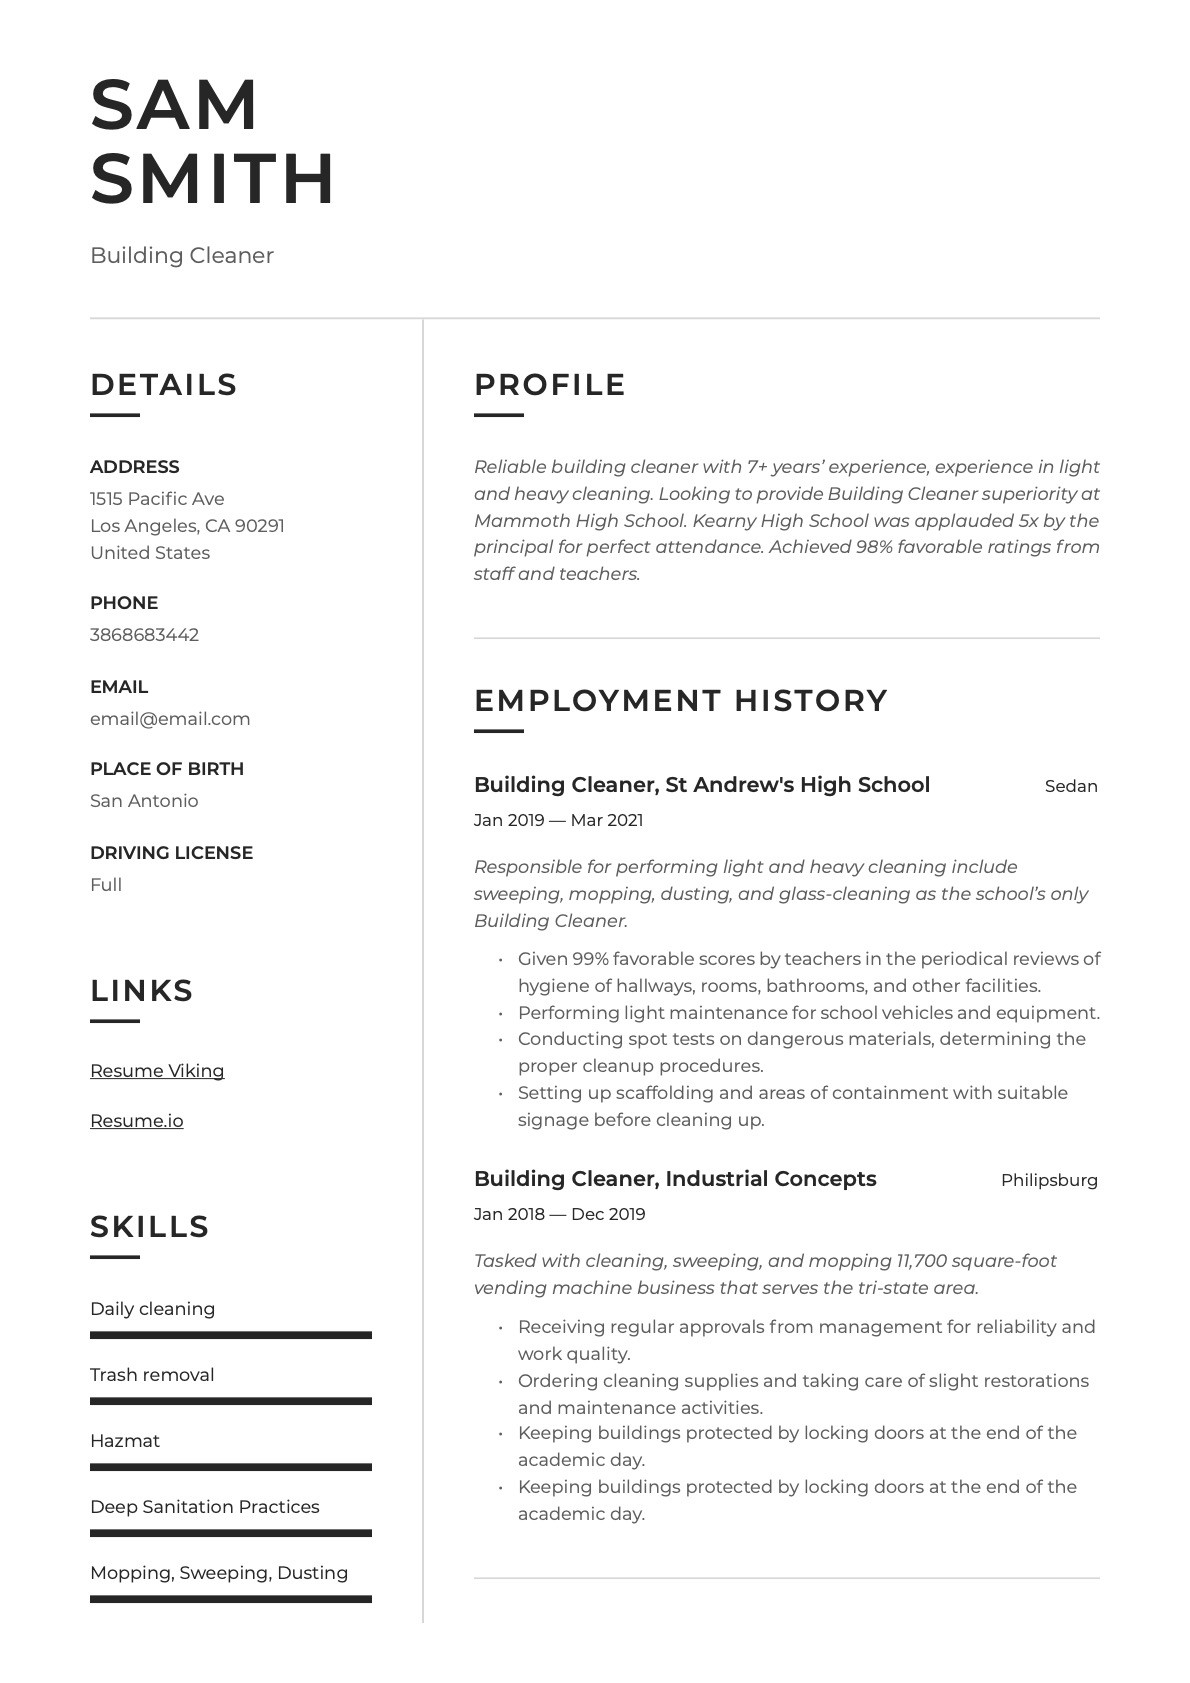 Example Resume Building Cleaner-14